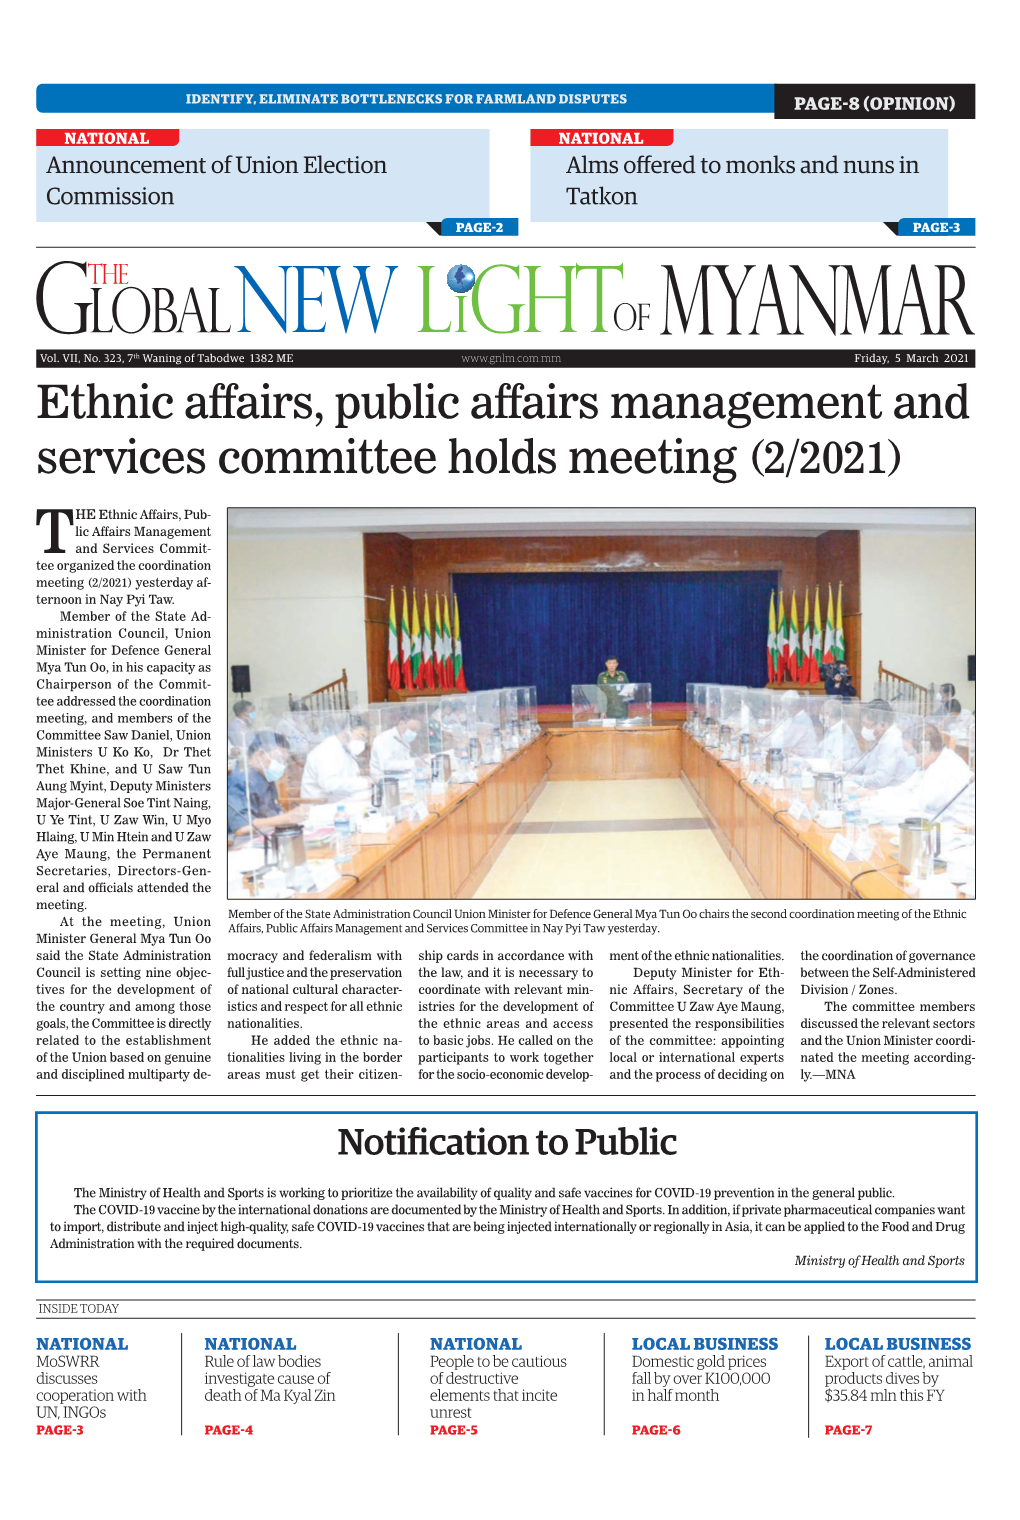 Ethnic Affairs, Public Affairs Management and Services Committee Holds Meeting (2/2021)